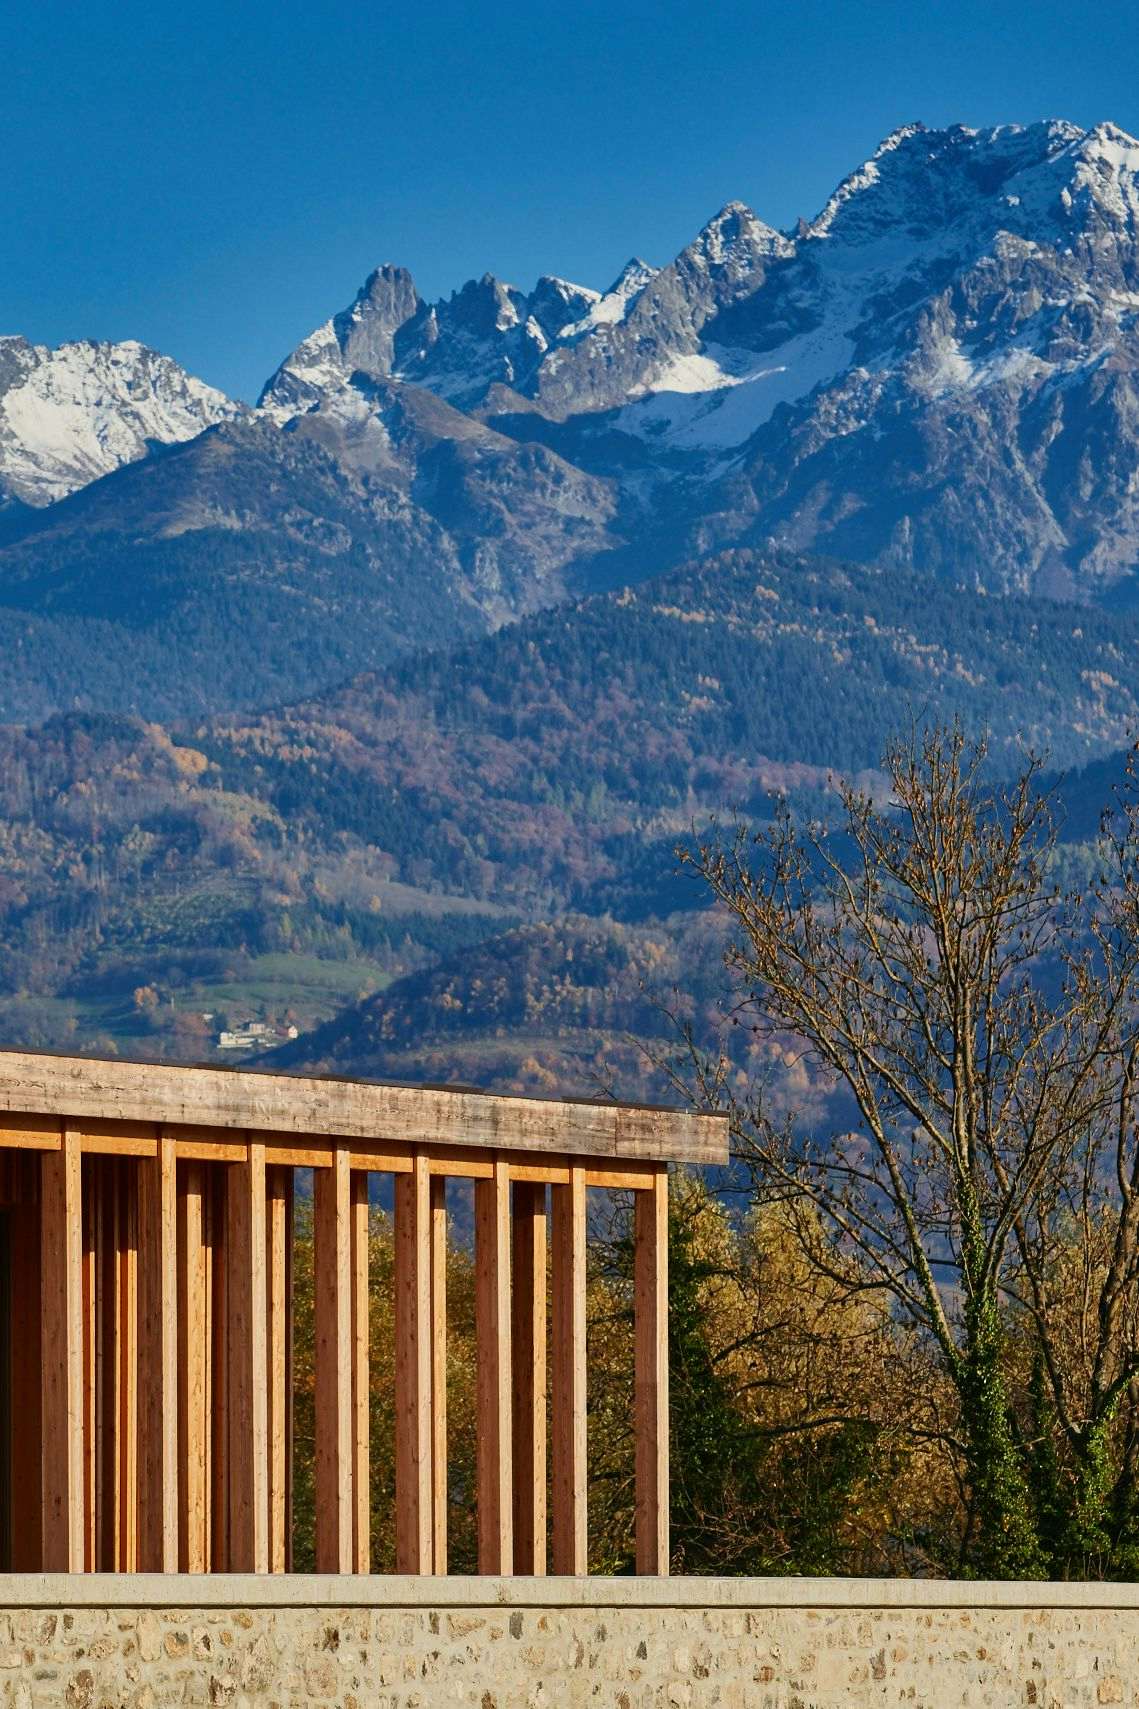 The Belledonne mountain range overlooking the Maison des Arts building in Montbonnot-Saint-Martin, France. Photography by Xavier Wendling.